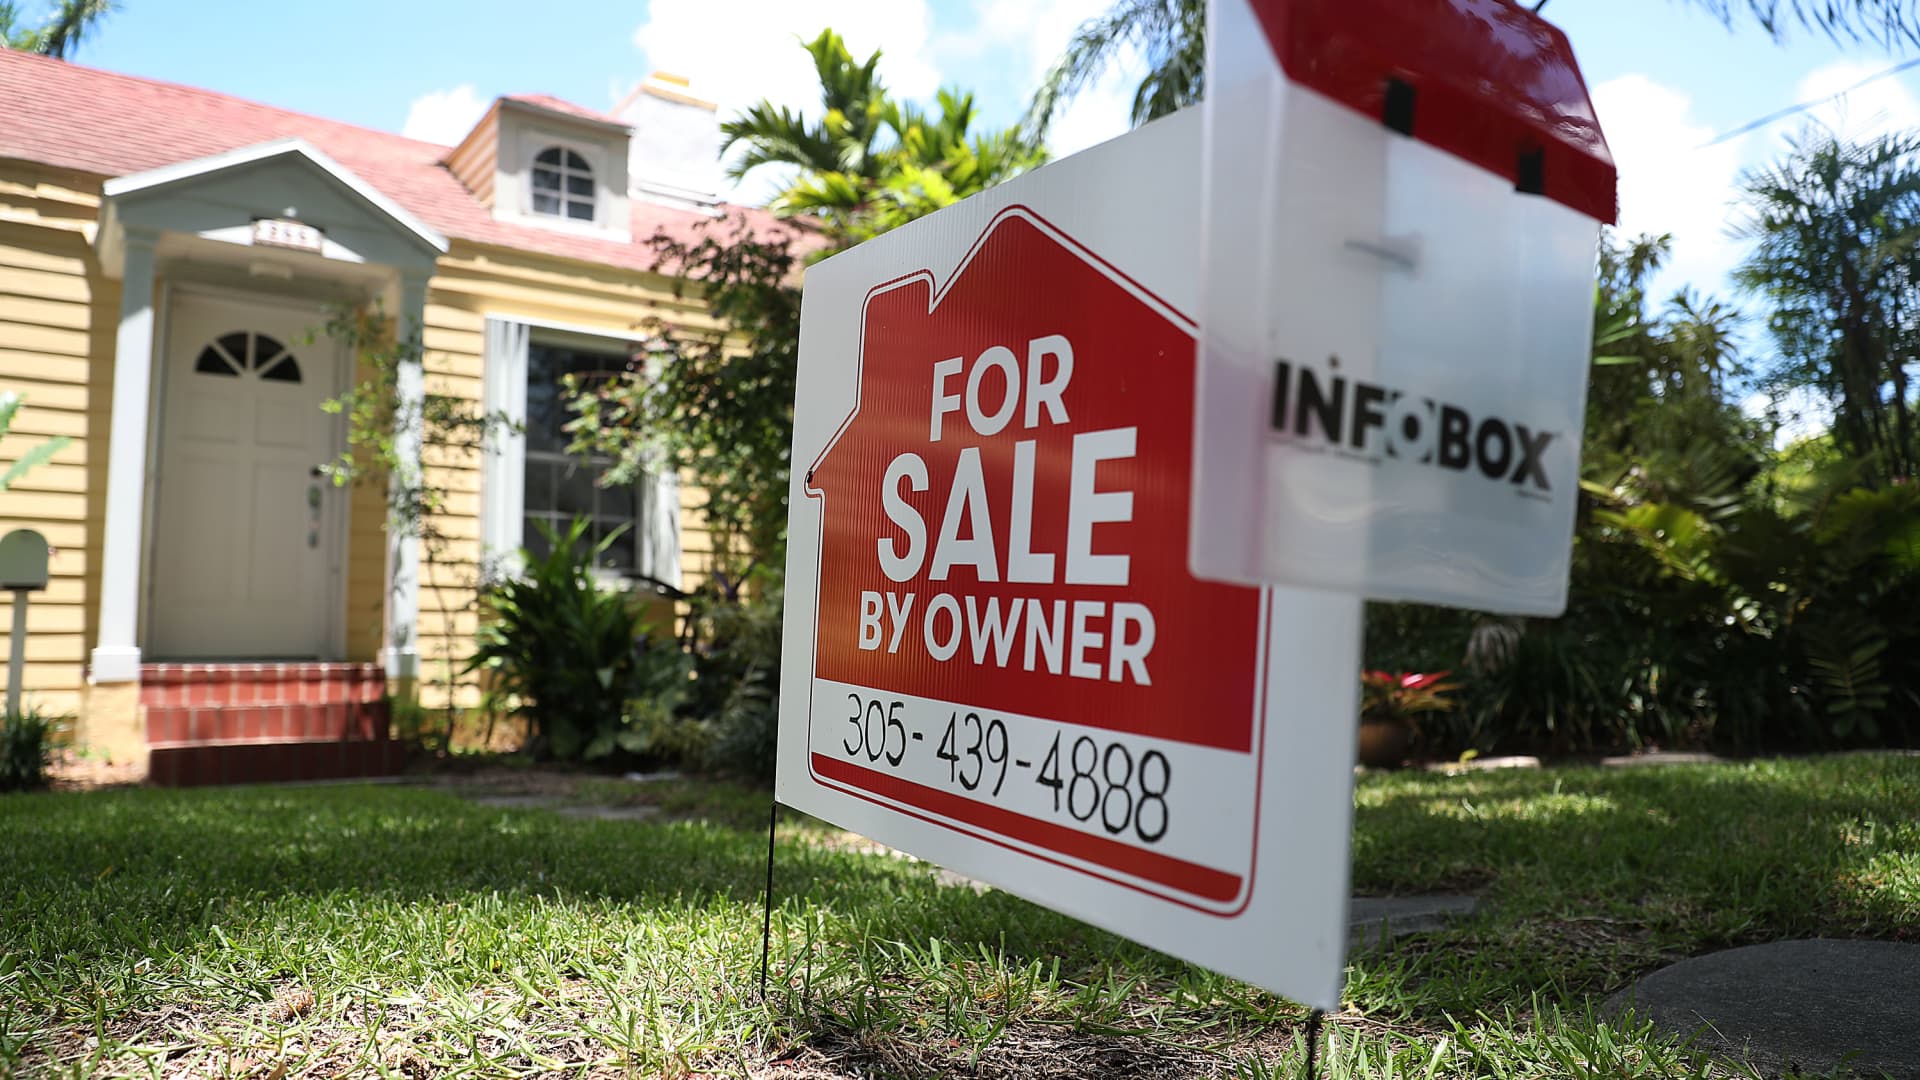 Home prices jumped 20% in February, slowdown may be coming: S&P Case-Shiller